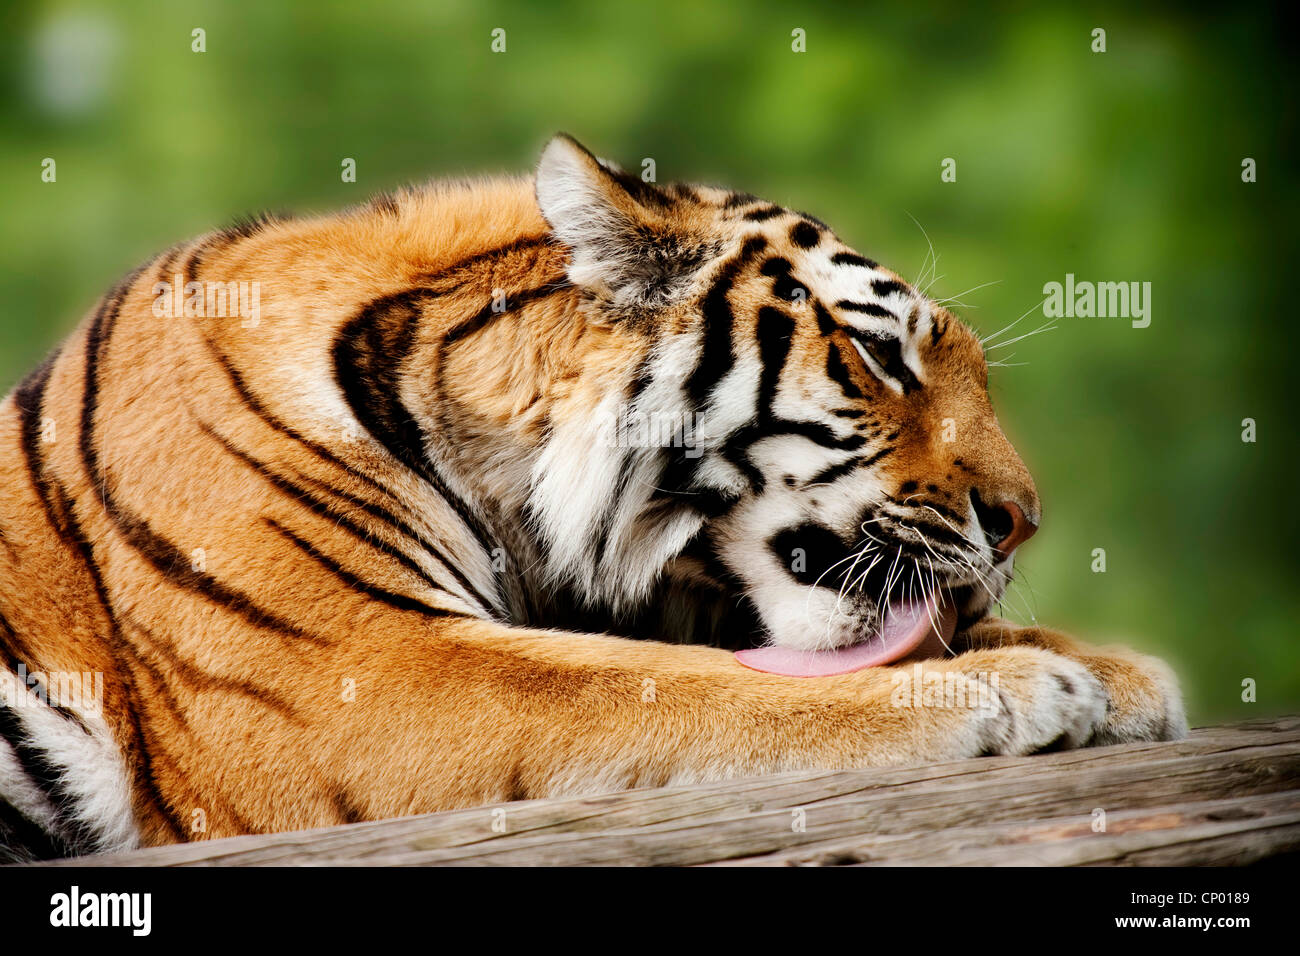 Siberian tiger, Amurian tiger (Panthera tigris altaica), resting on deadwood licking its paws Stock Photo